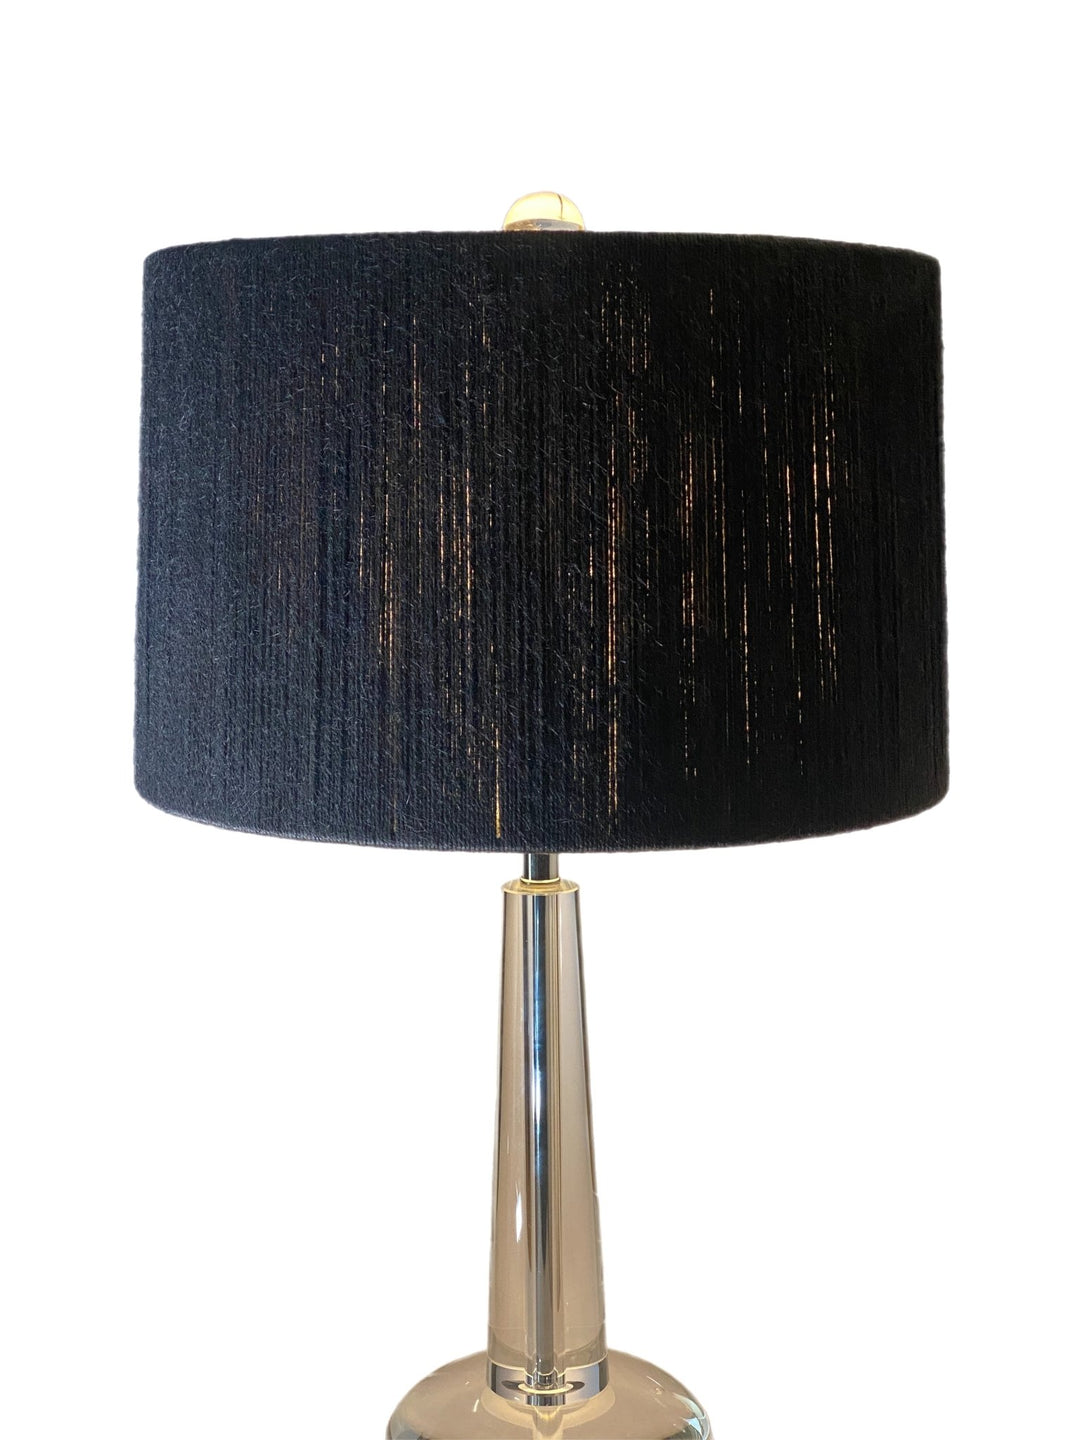 Custom Made Jute String Drum Lamp shade 16" Base - (3) in stock and ready to ship - Lux Lamp Shades